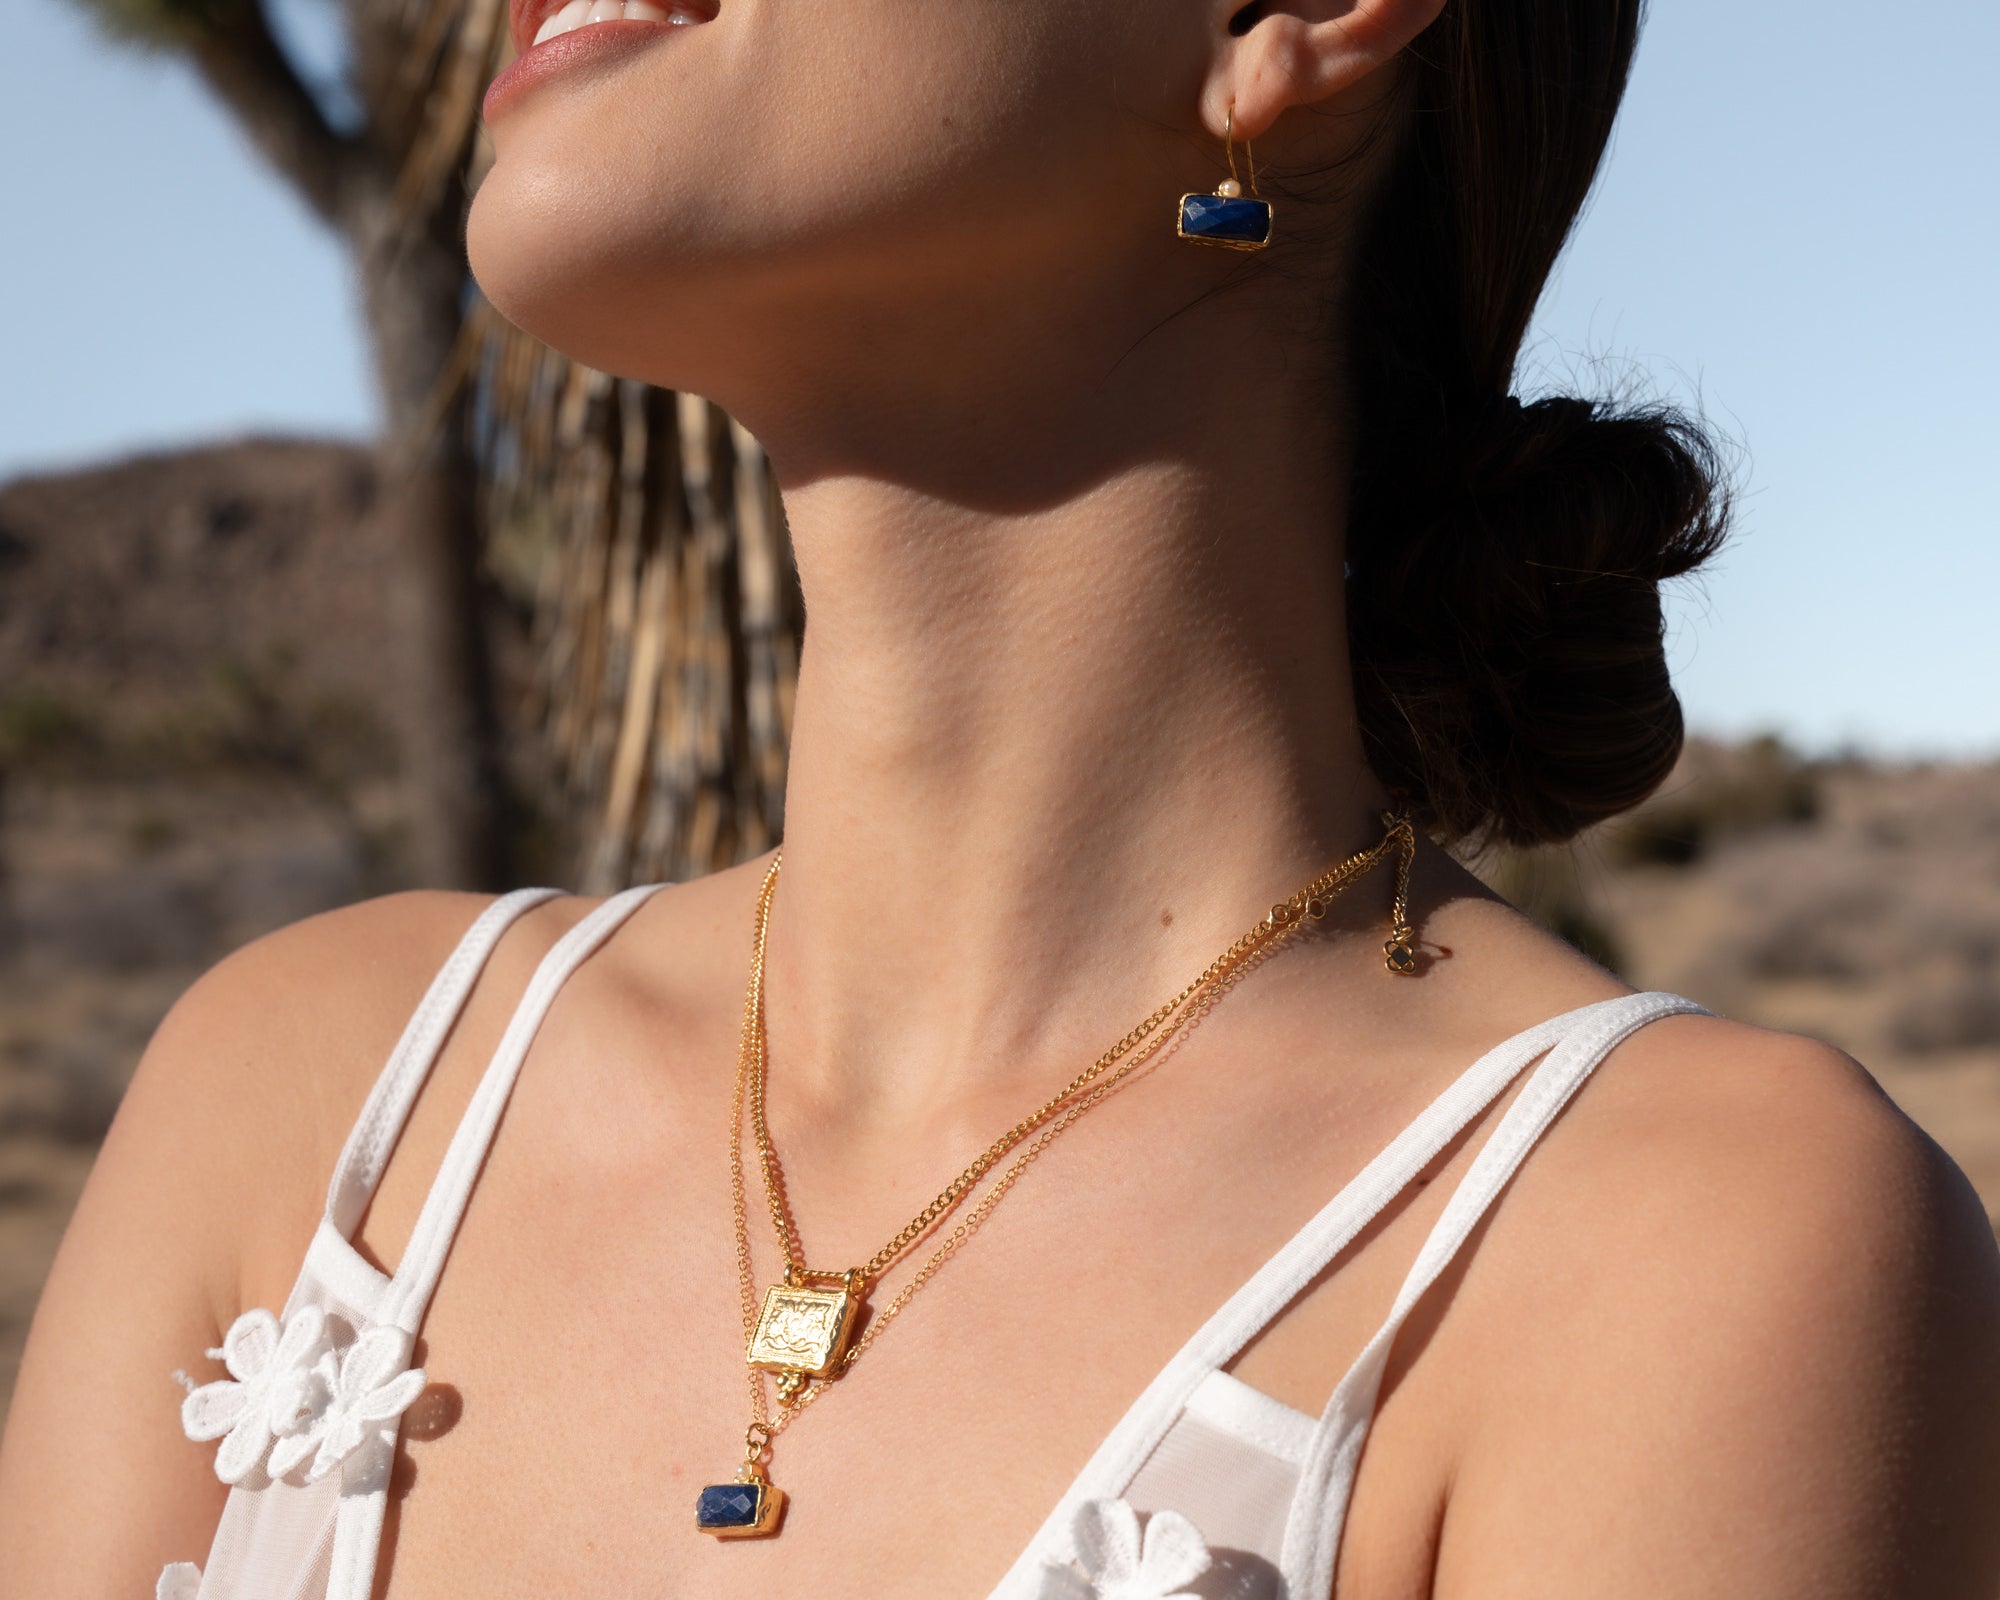 Lara Lapis and Pearl Pendant Necklace | Sustainable Jewellery by Ottoman Hands